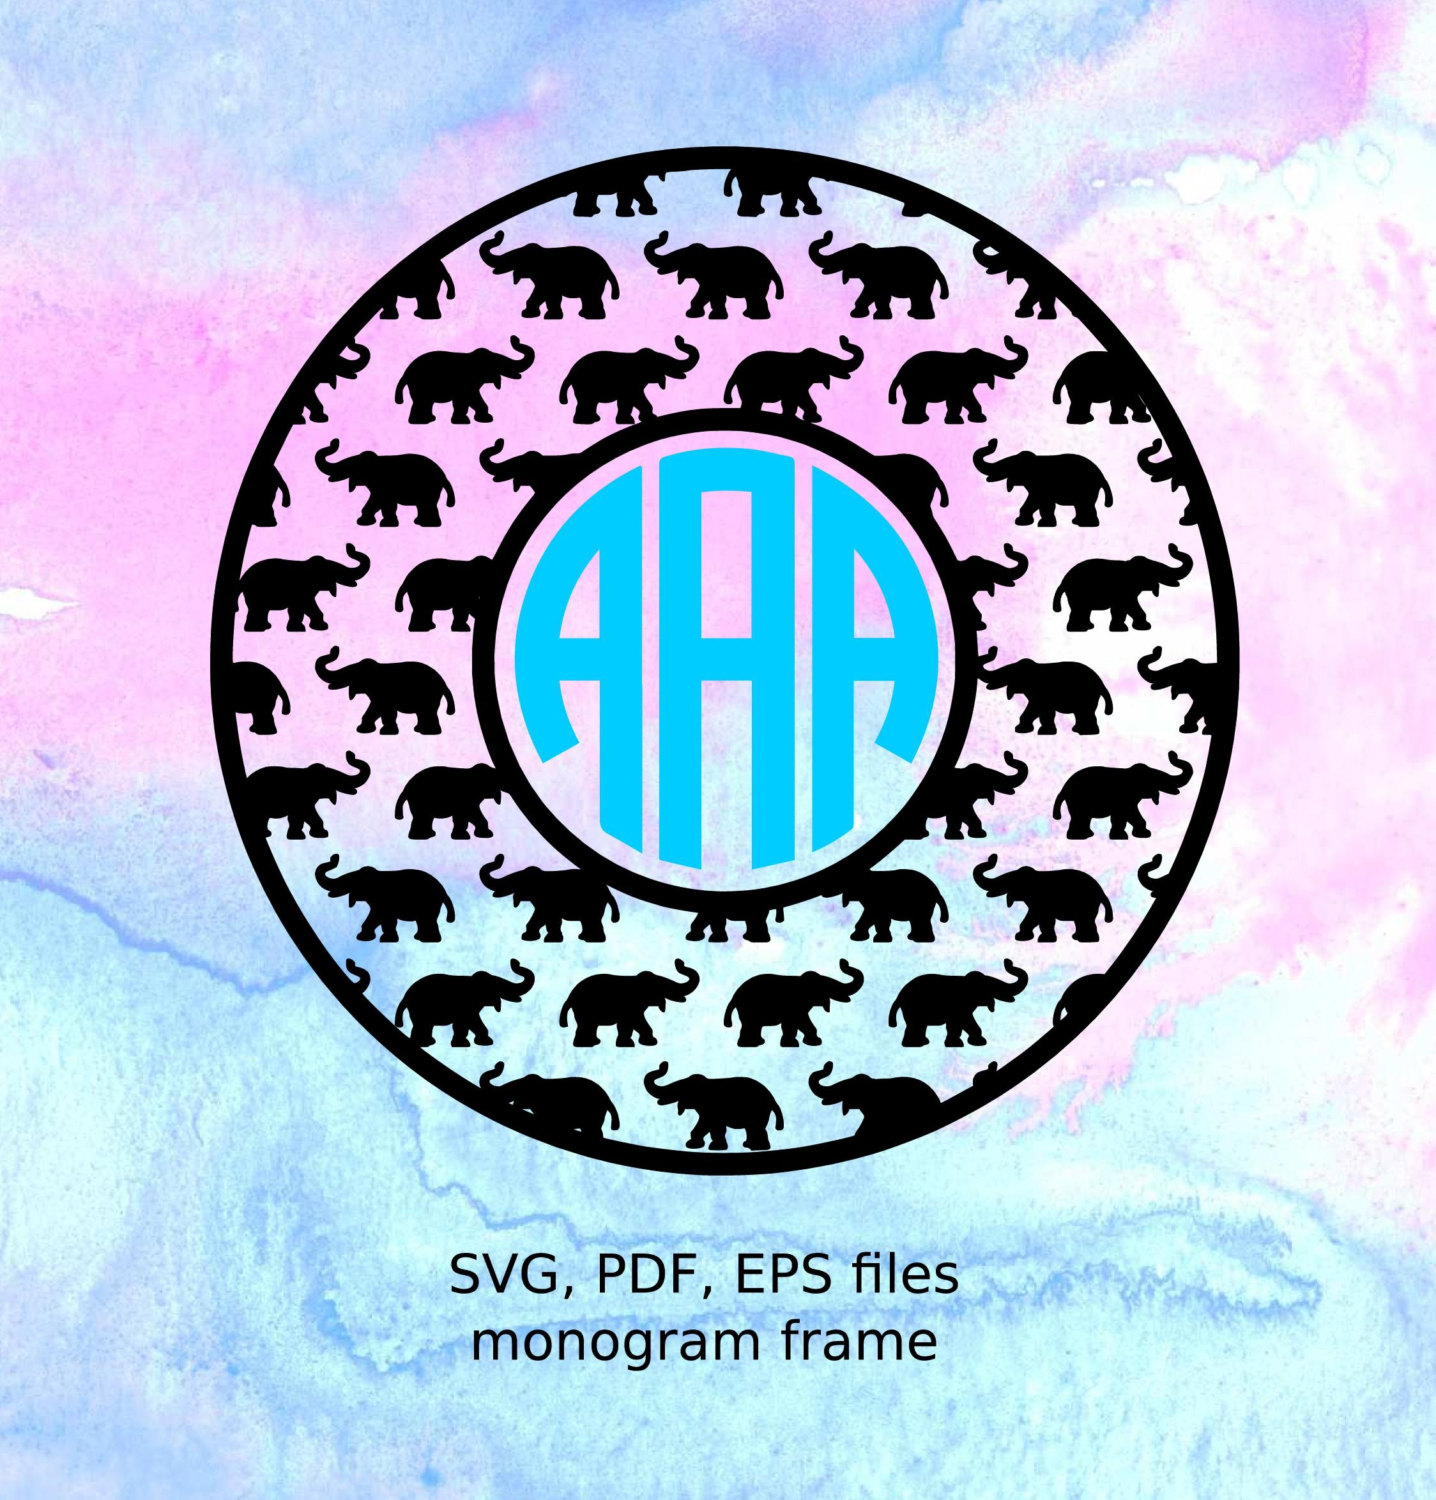 Download Elephant Monogram Frame svg pdf eps files for cutting in